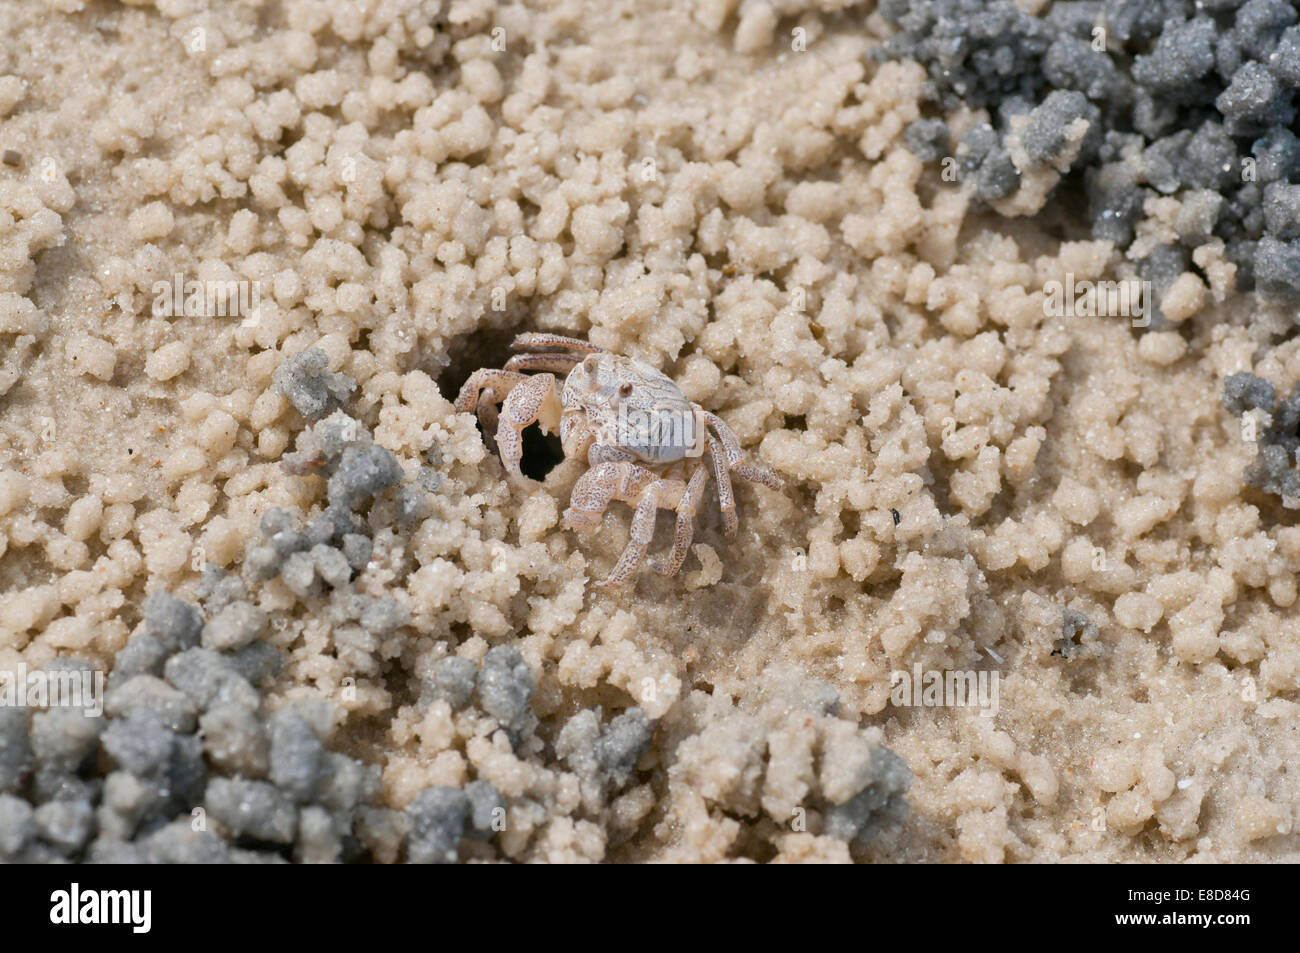 One of many small ghost crabs on the beach at Dar es Salaam - probably Ocypode ryderi but may be another species Stock Photo